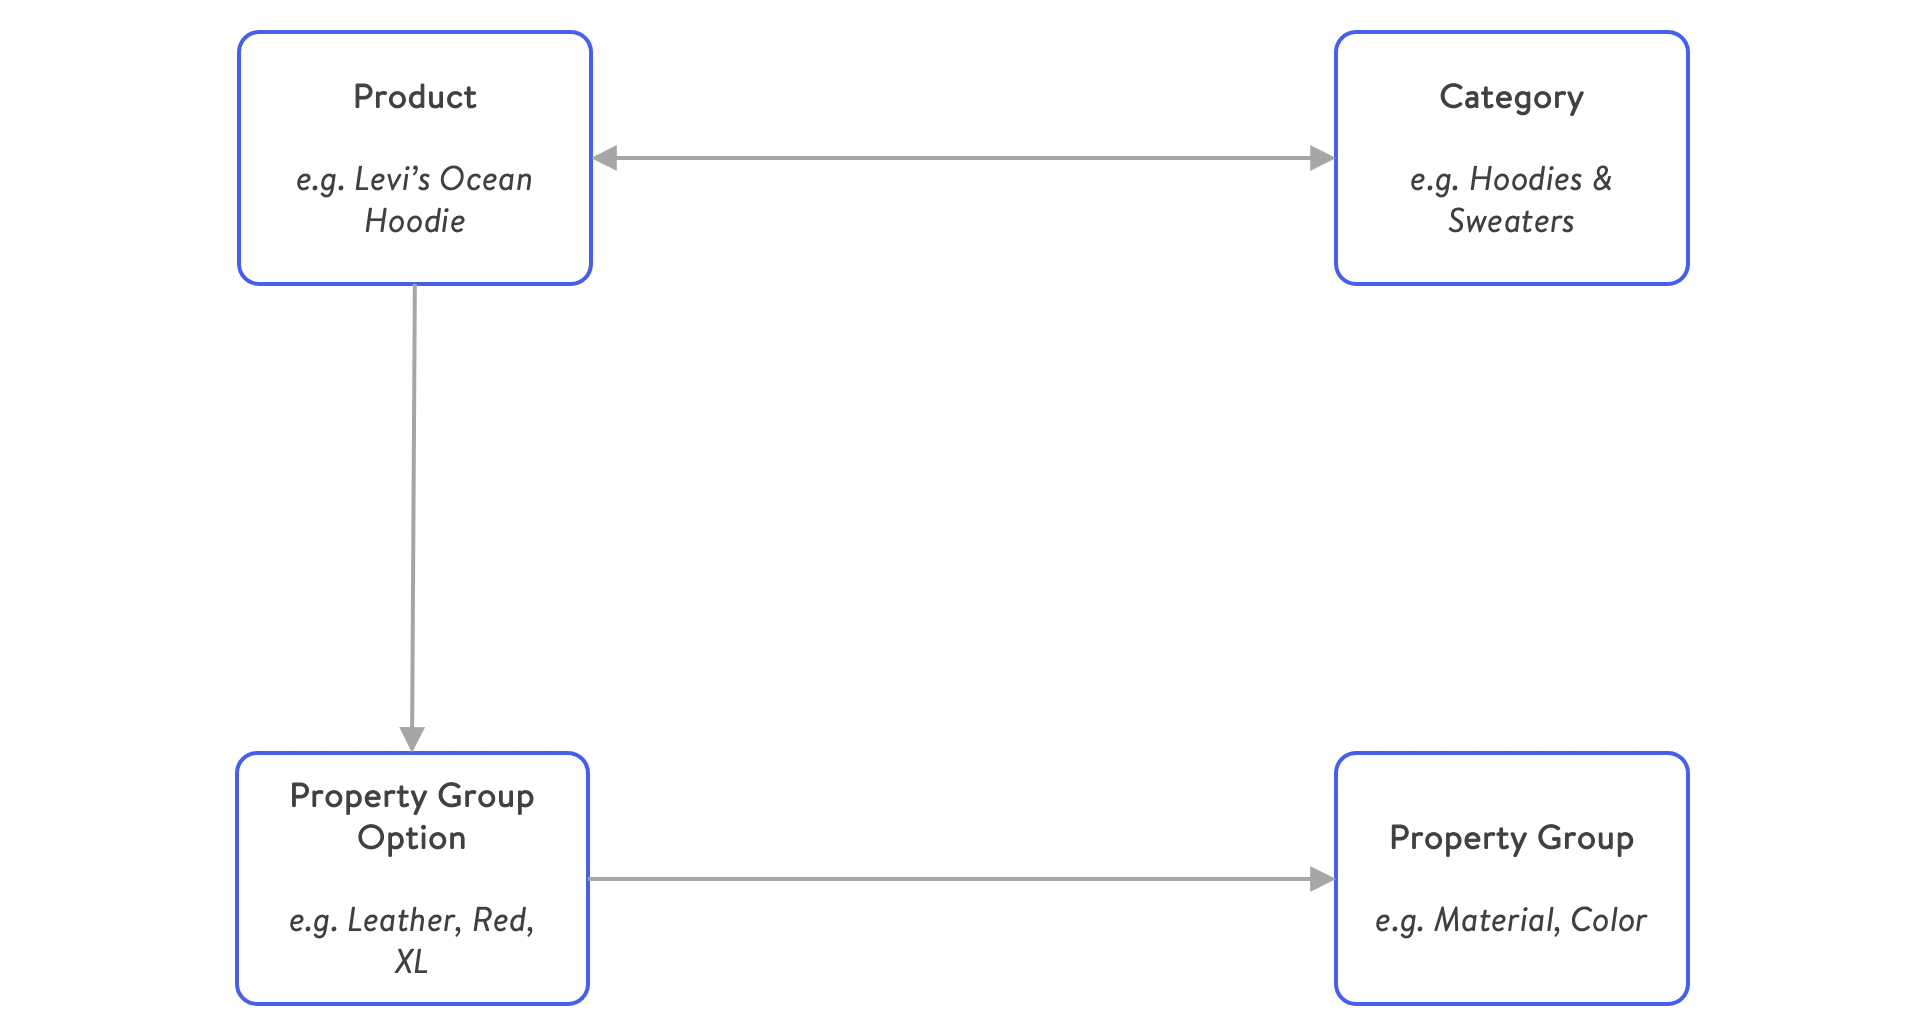 Condensed overview of the product data model